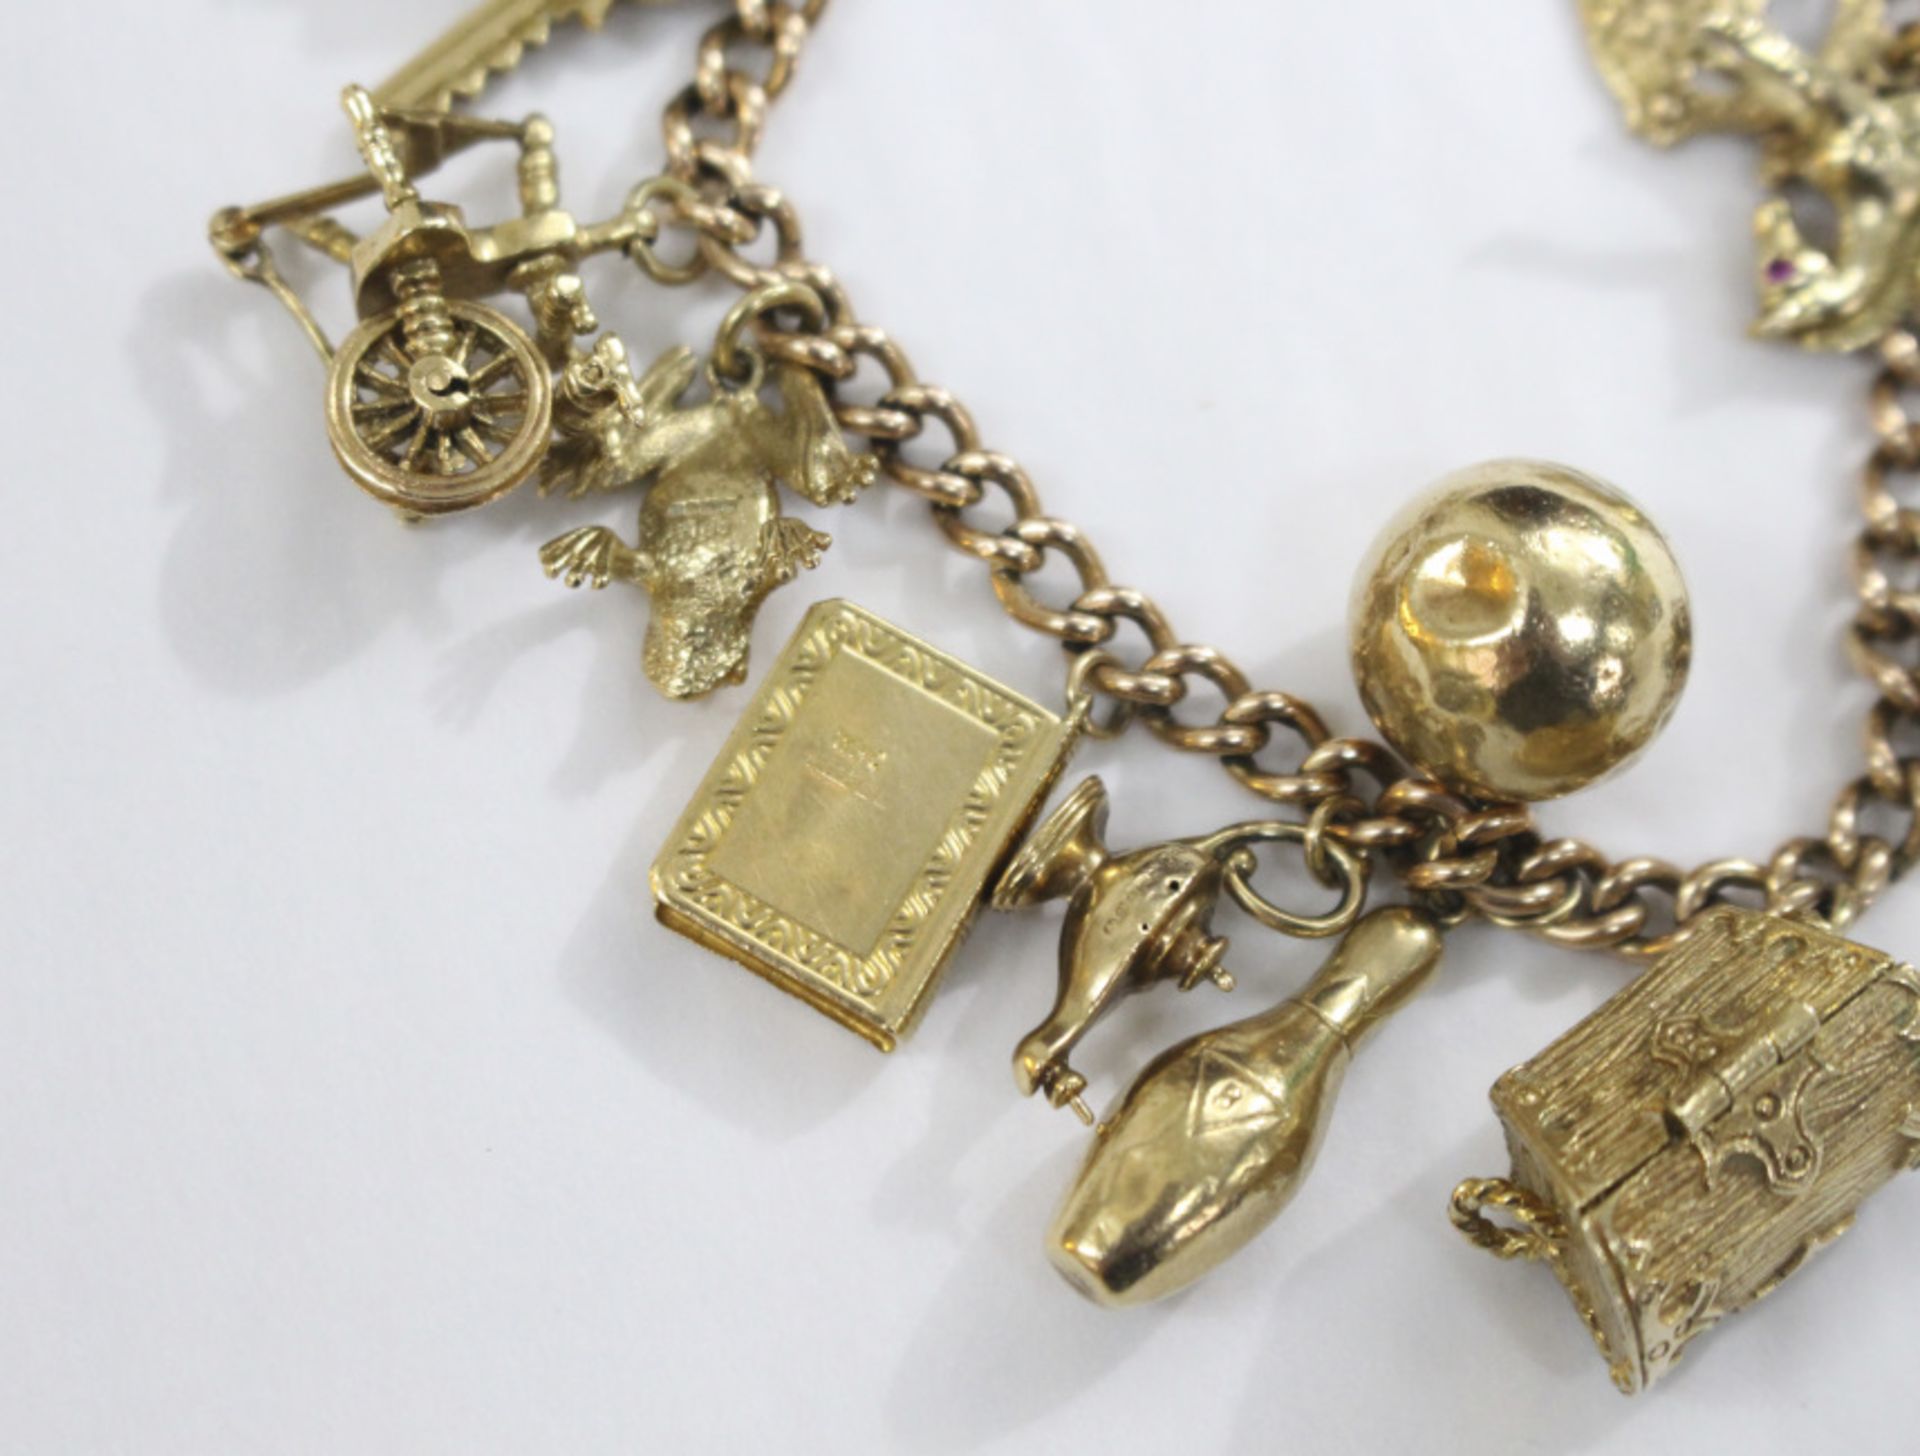 9ct Gold Vintage Charm Bracelet with 14 Charms - Image 8 of 10